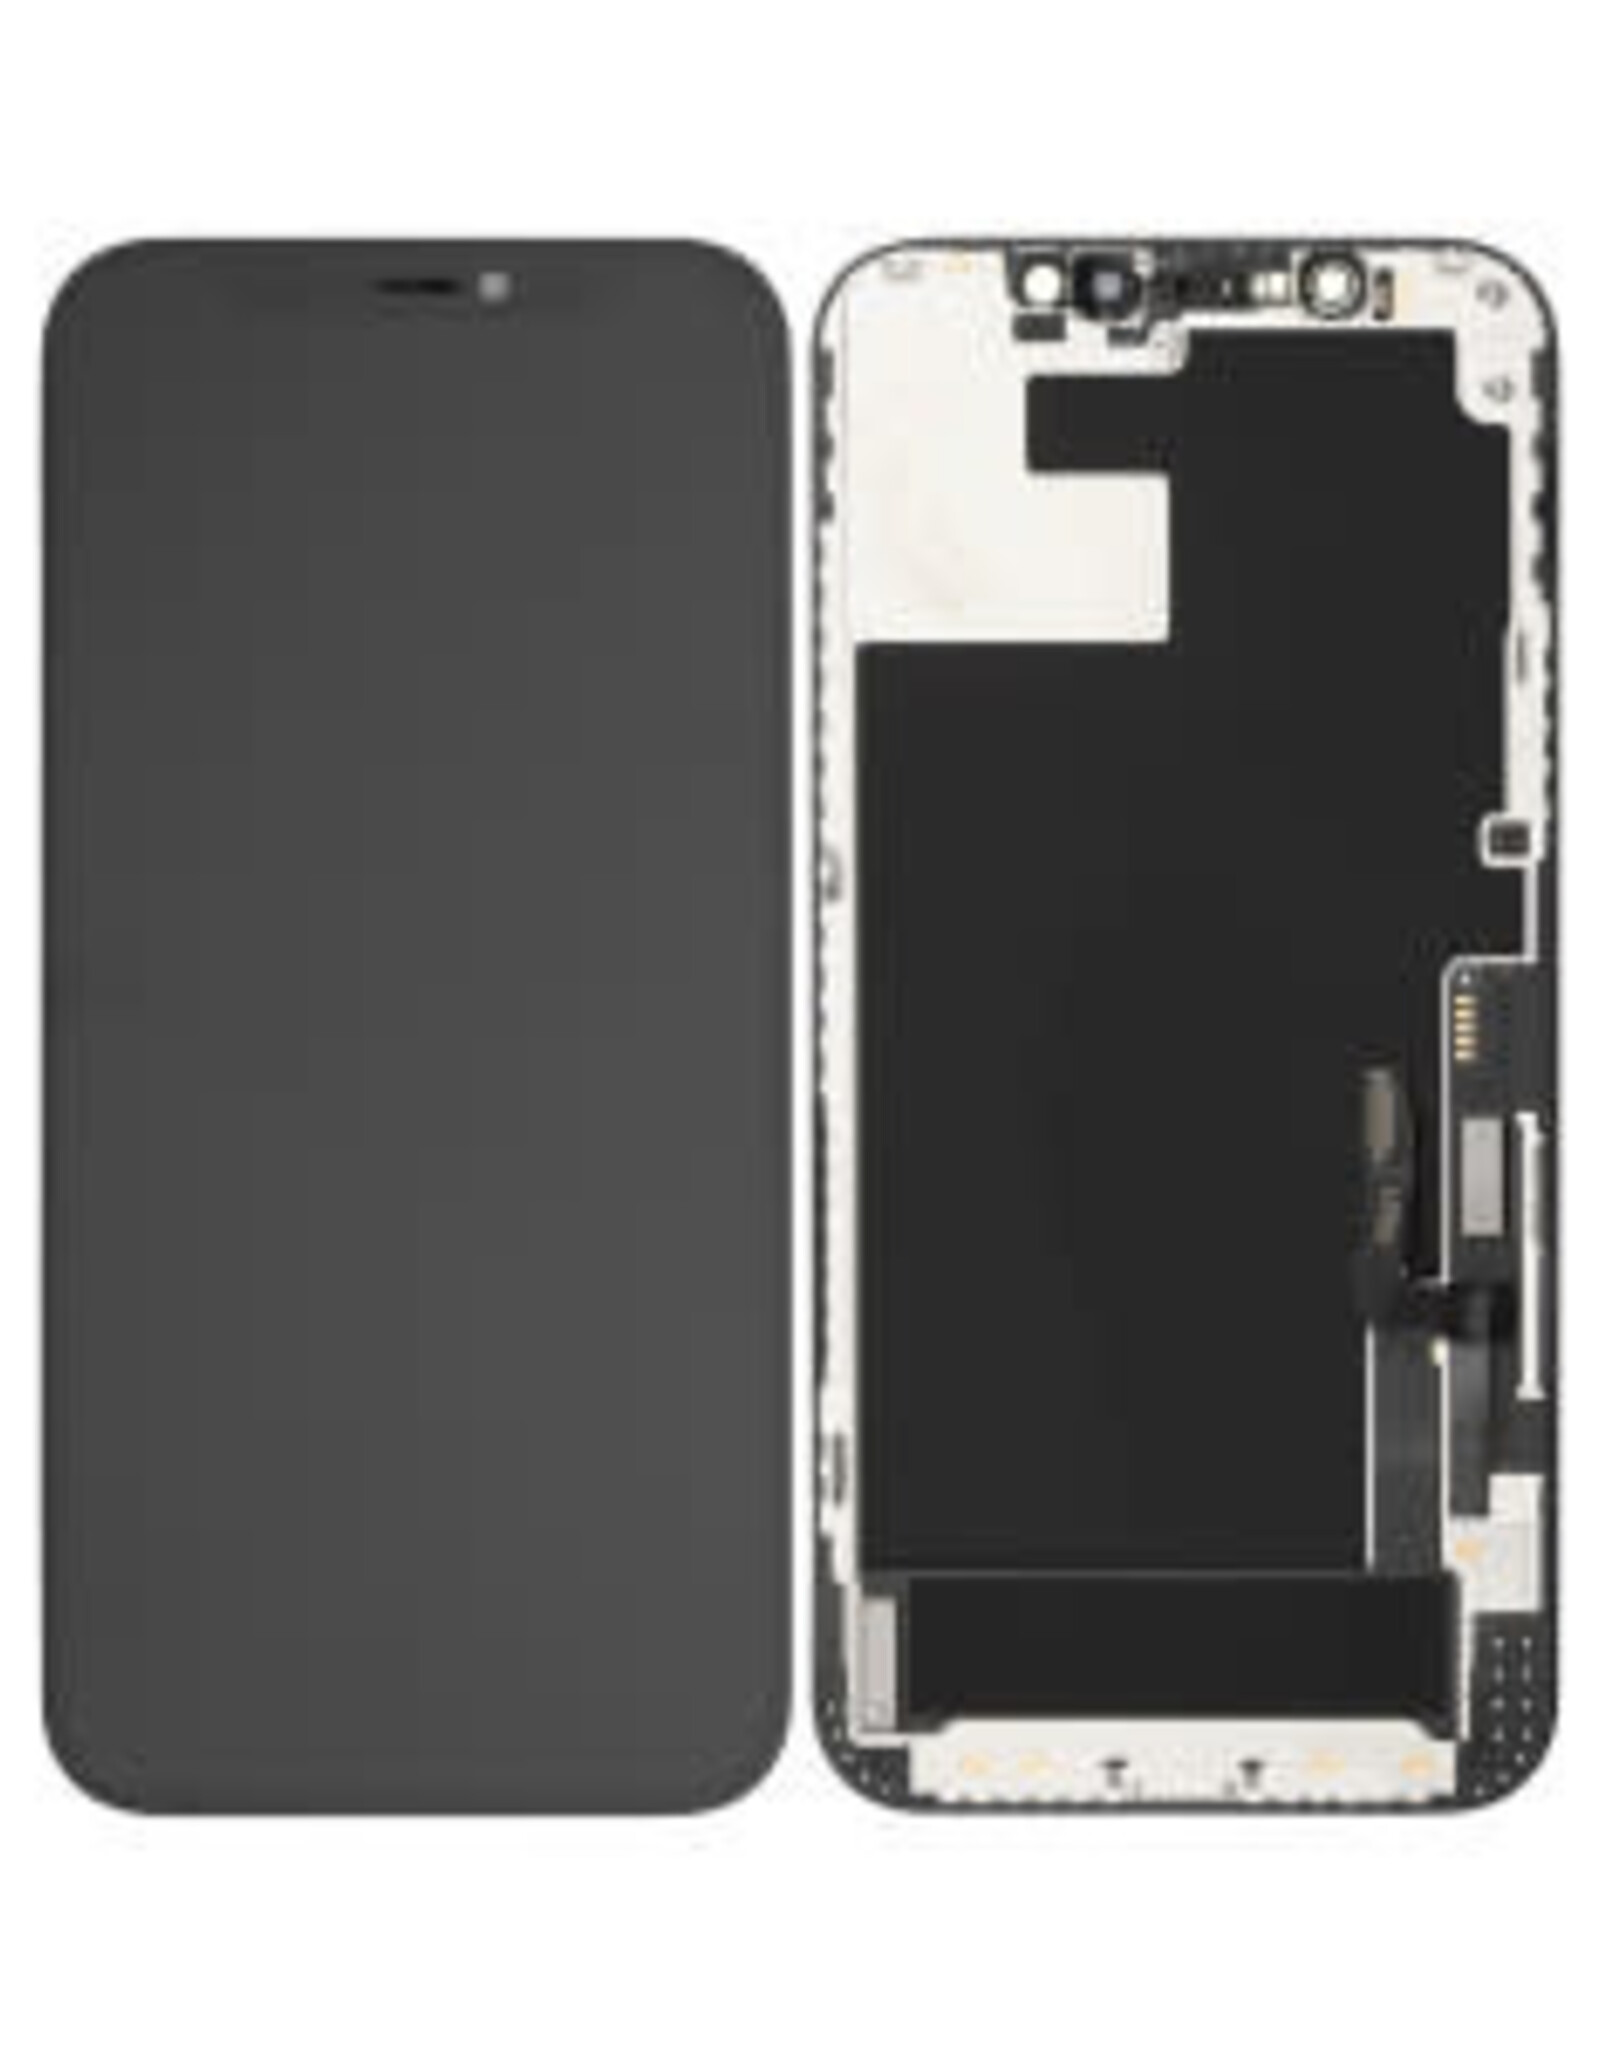 iPhone 12 Pro LCD Screen Replacement (parts)